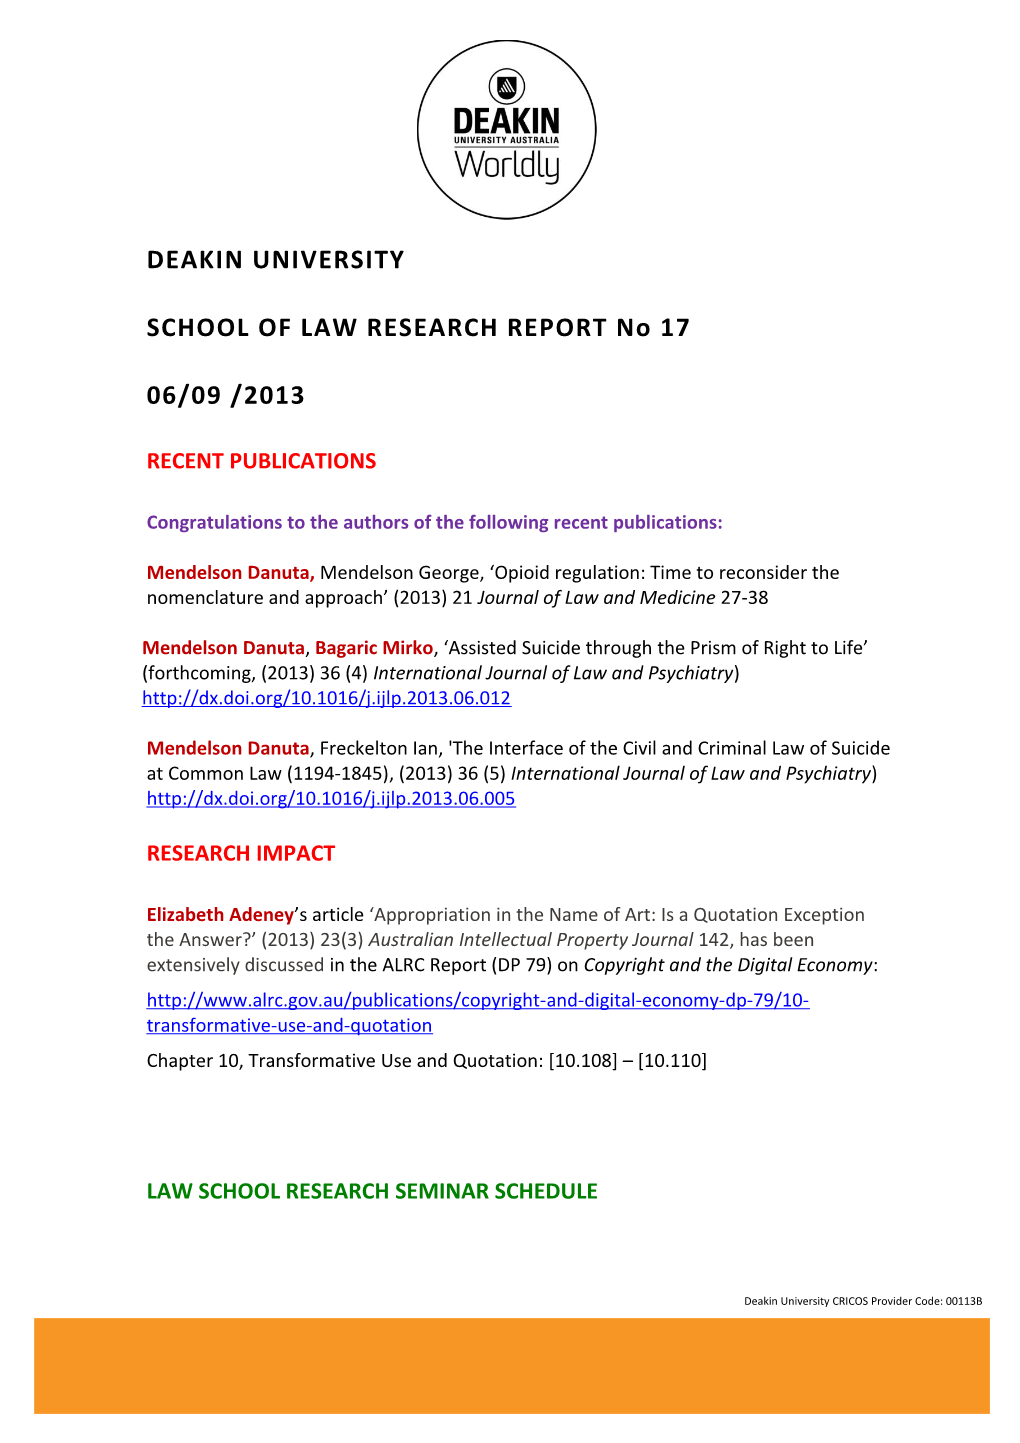 SCHOOL of LAW RESEARCH REPORT No 17